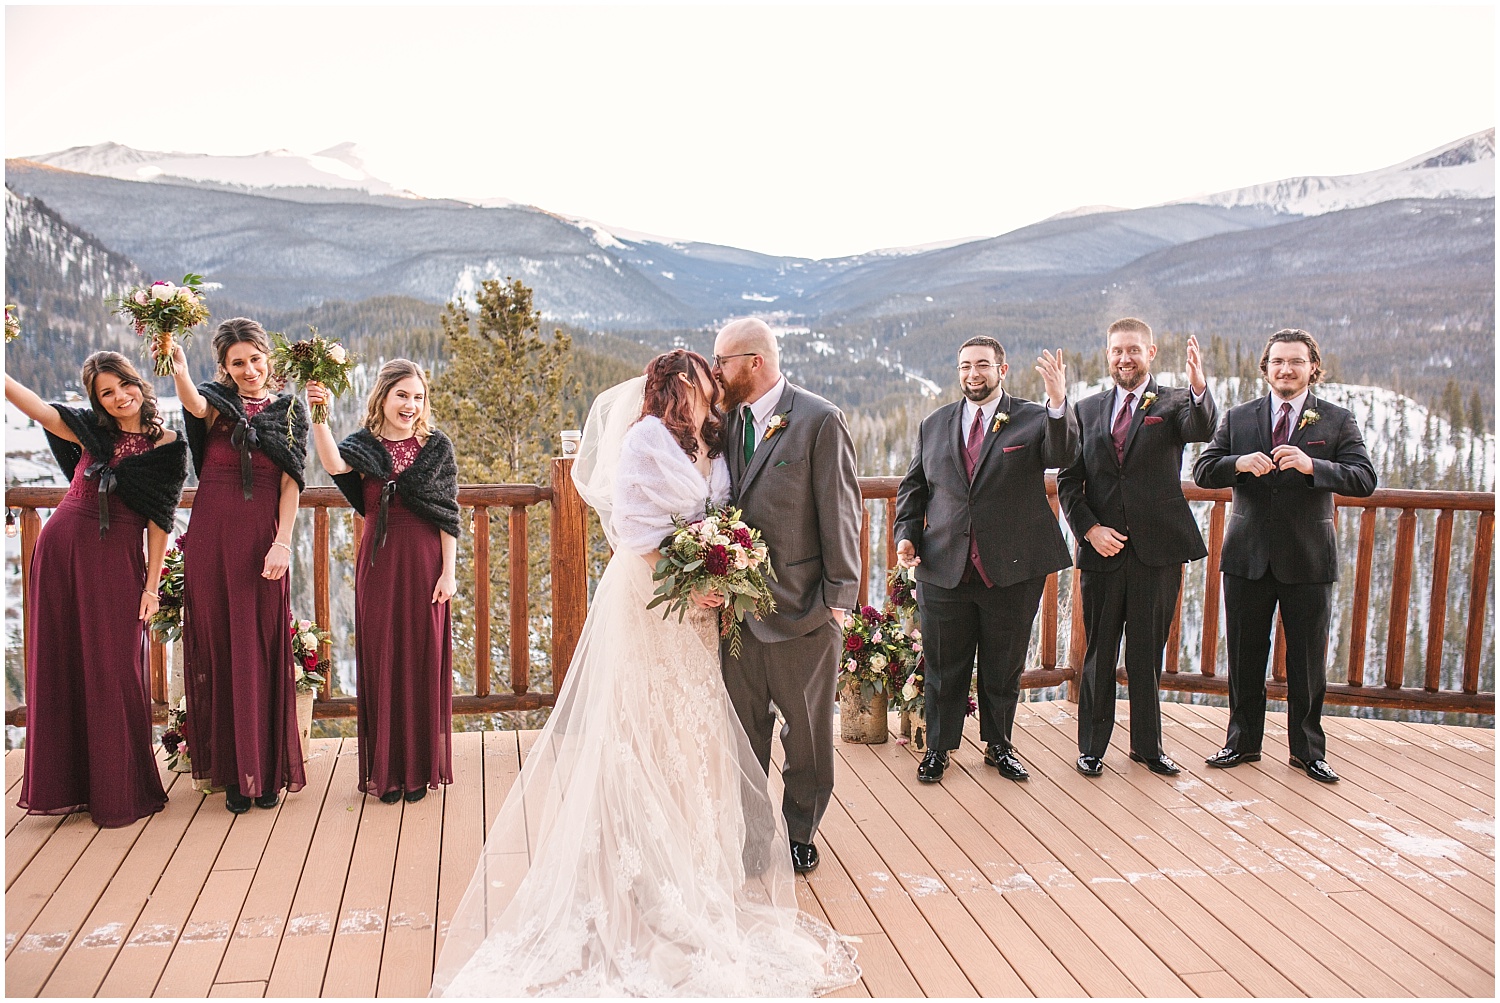 wedding party pictures on the deck at The Lodge at Breckenridge winter wedding